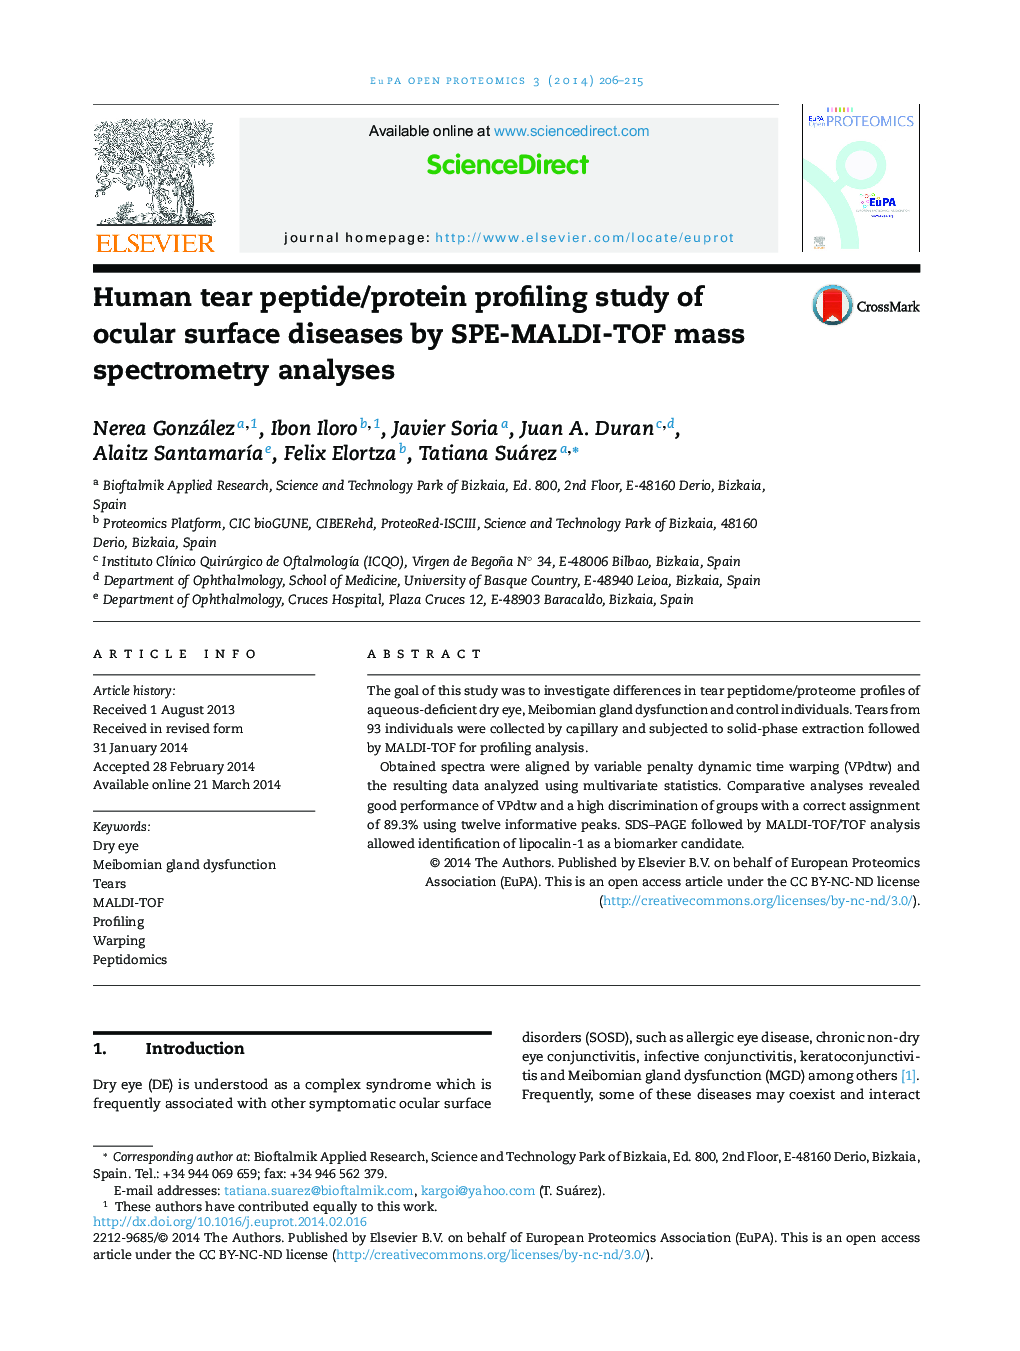 Human tear peptide/protein profiling study of ocular surface diseases by SPE-MALDI-TOF mass spectrometry analyses 